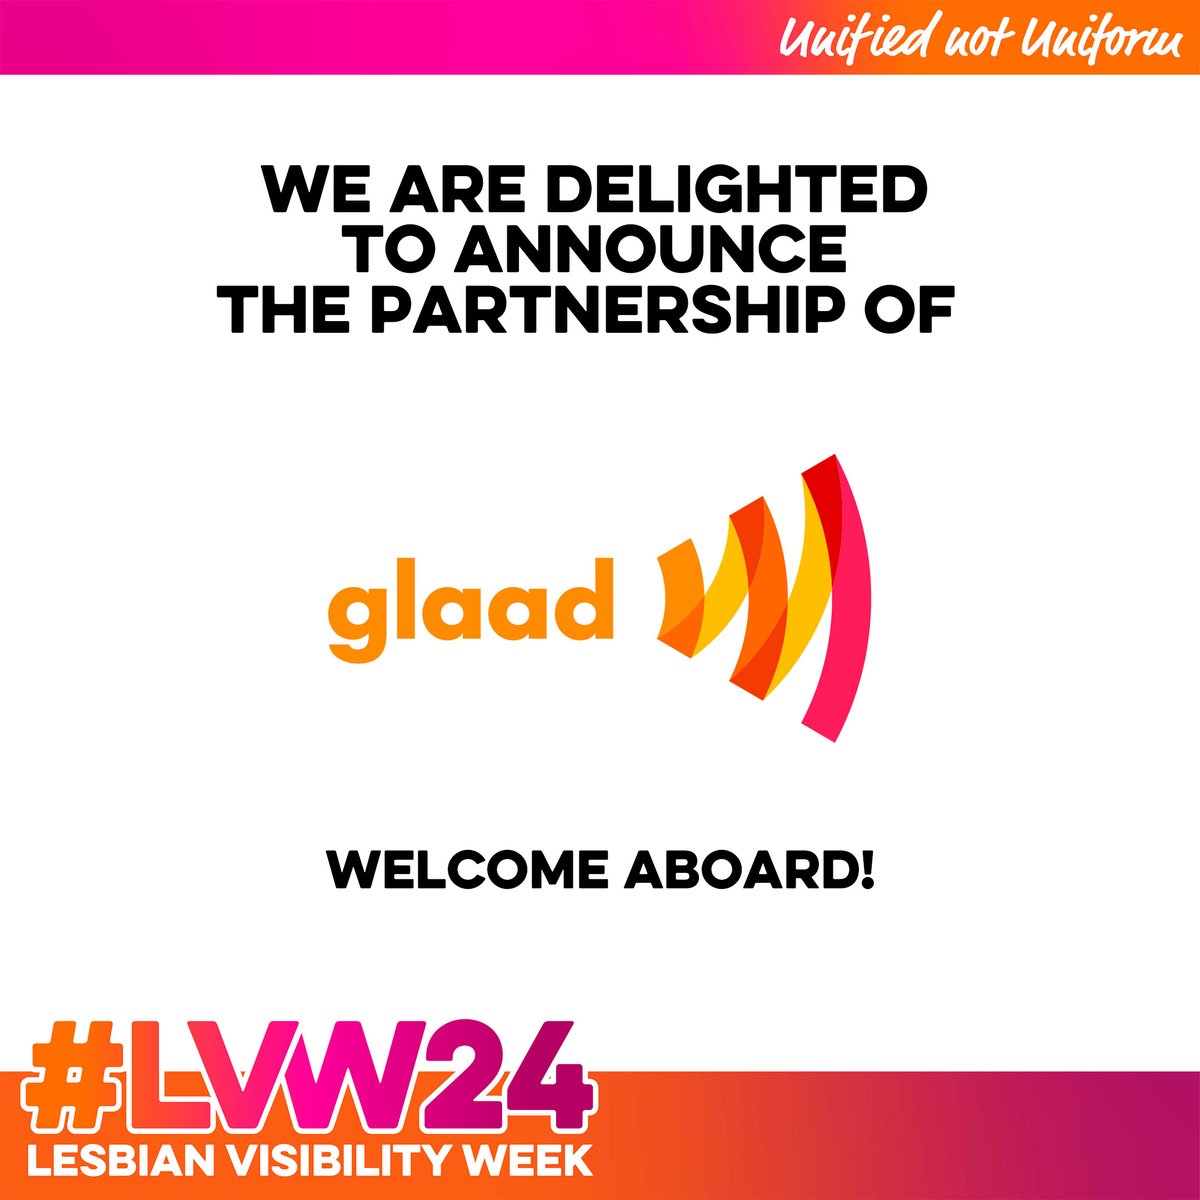 We are delighted to announce that the fabulous @glaad is one of our charity partners for #LVW24 🌈 Learn more about Lesbian Visibility Week: lesbianvisibilityweek.com